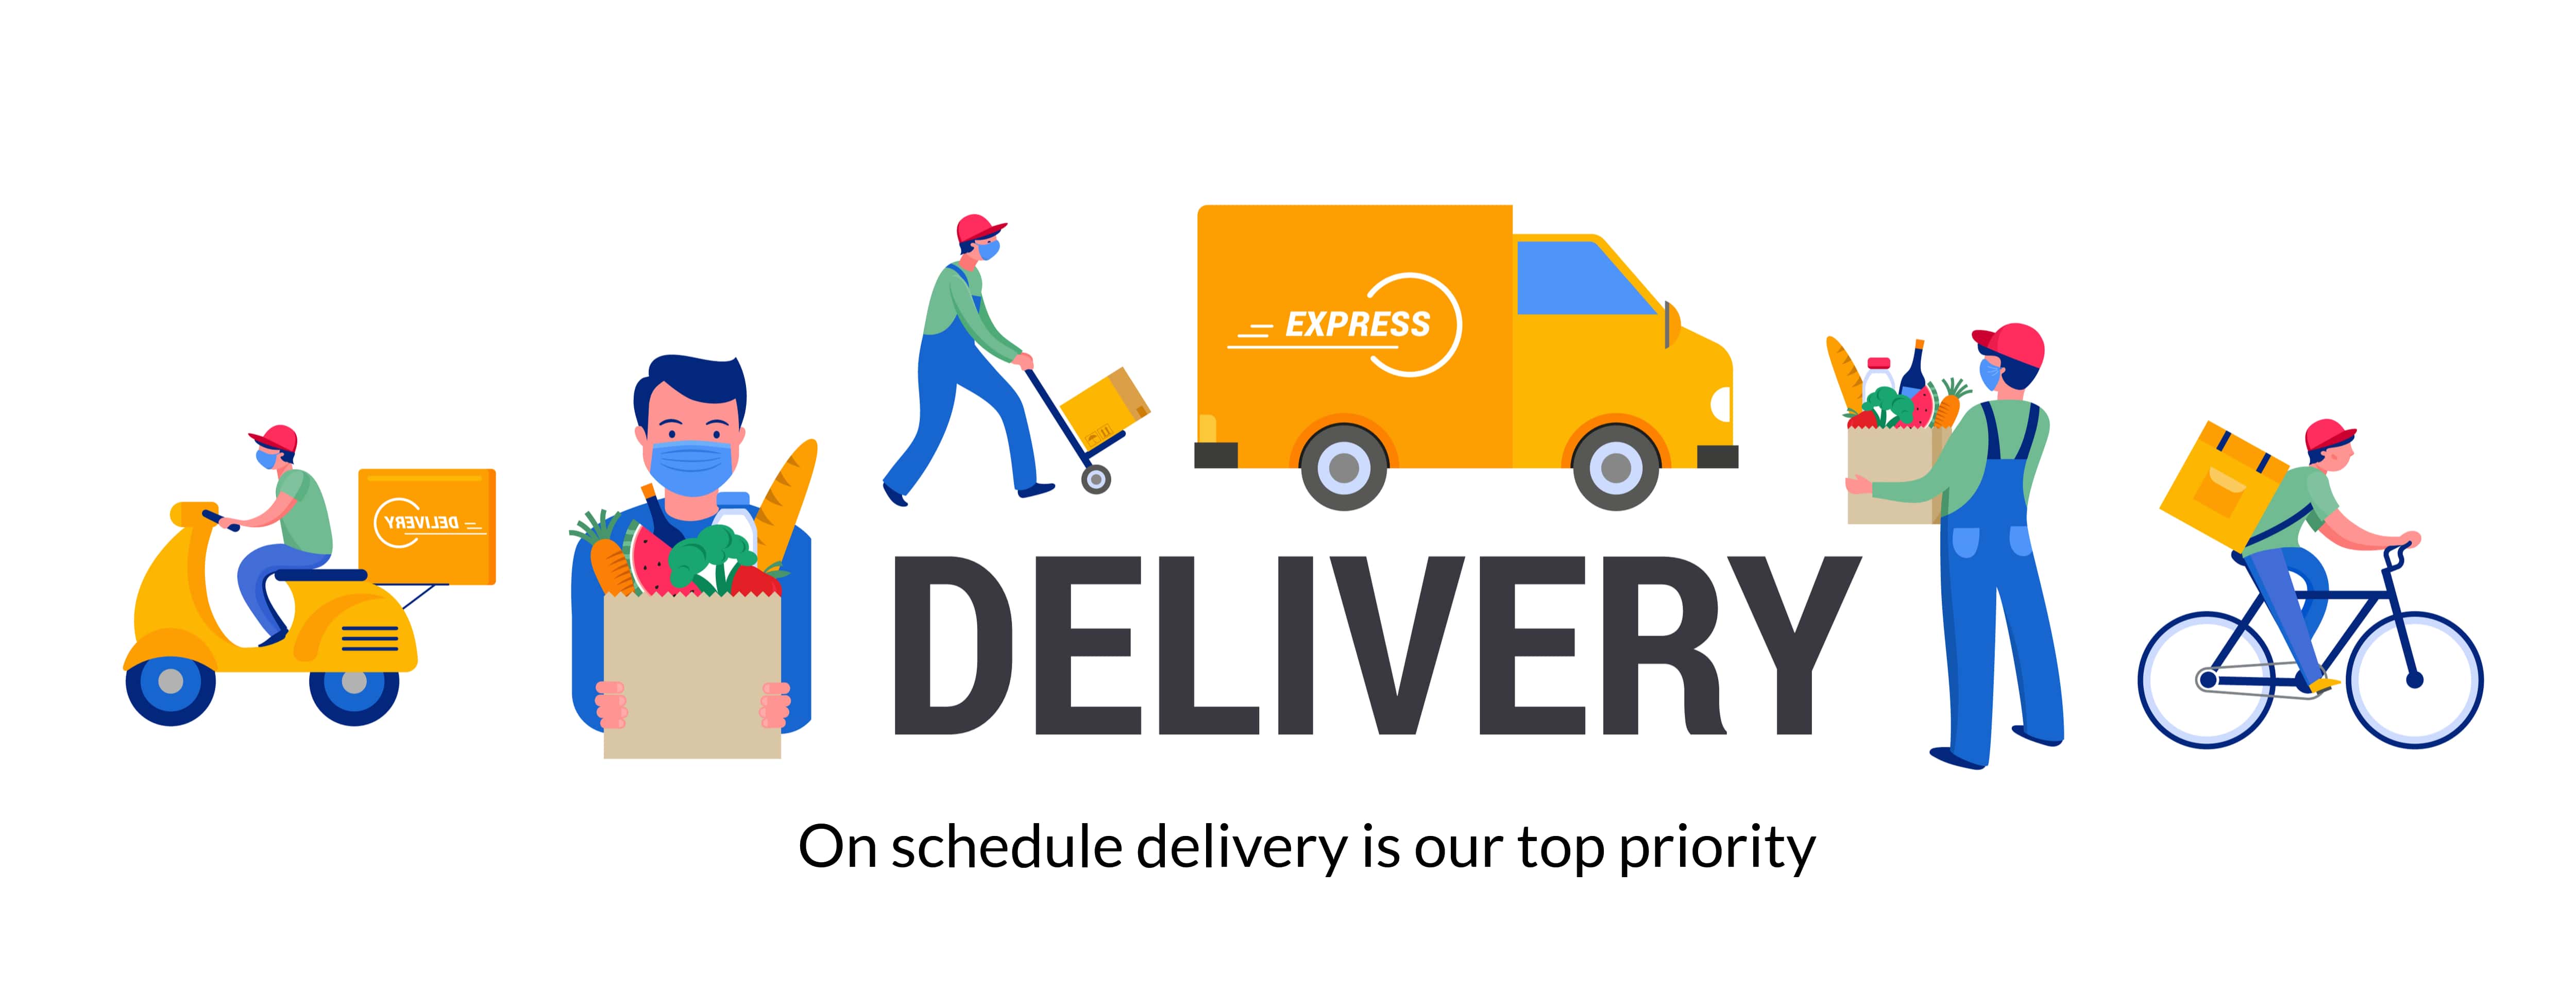 on schedule delivery is our top priority